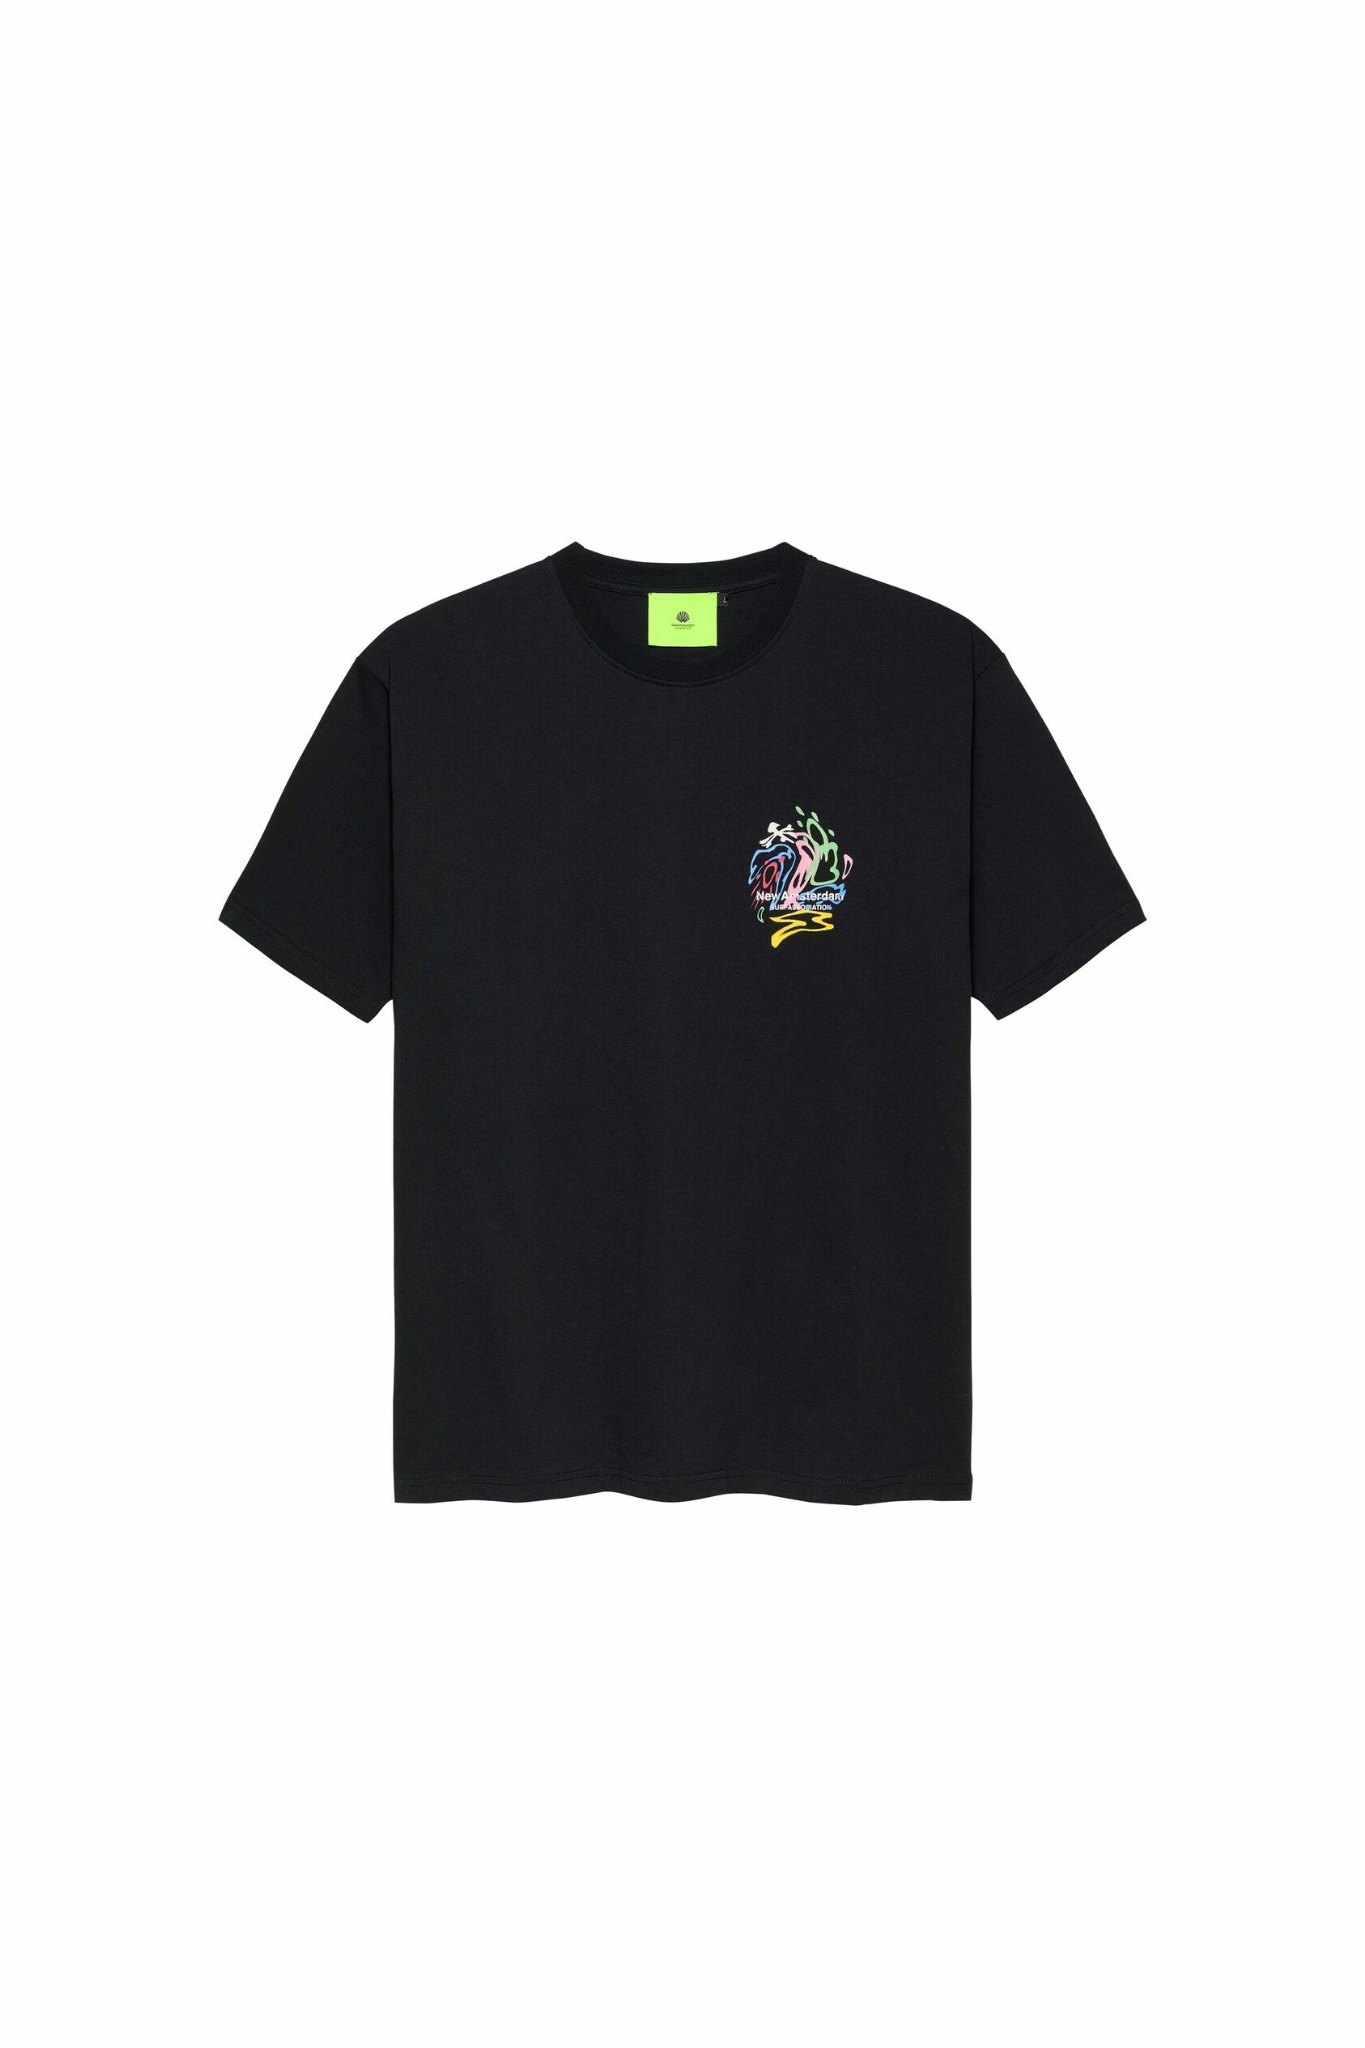 WEATHER ICONS T-SHIRT - BLACK